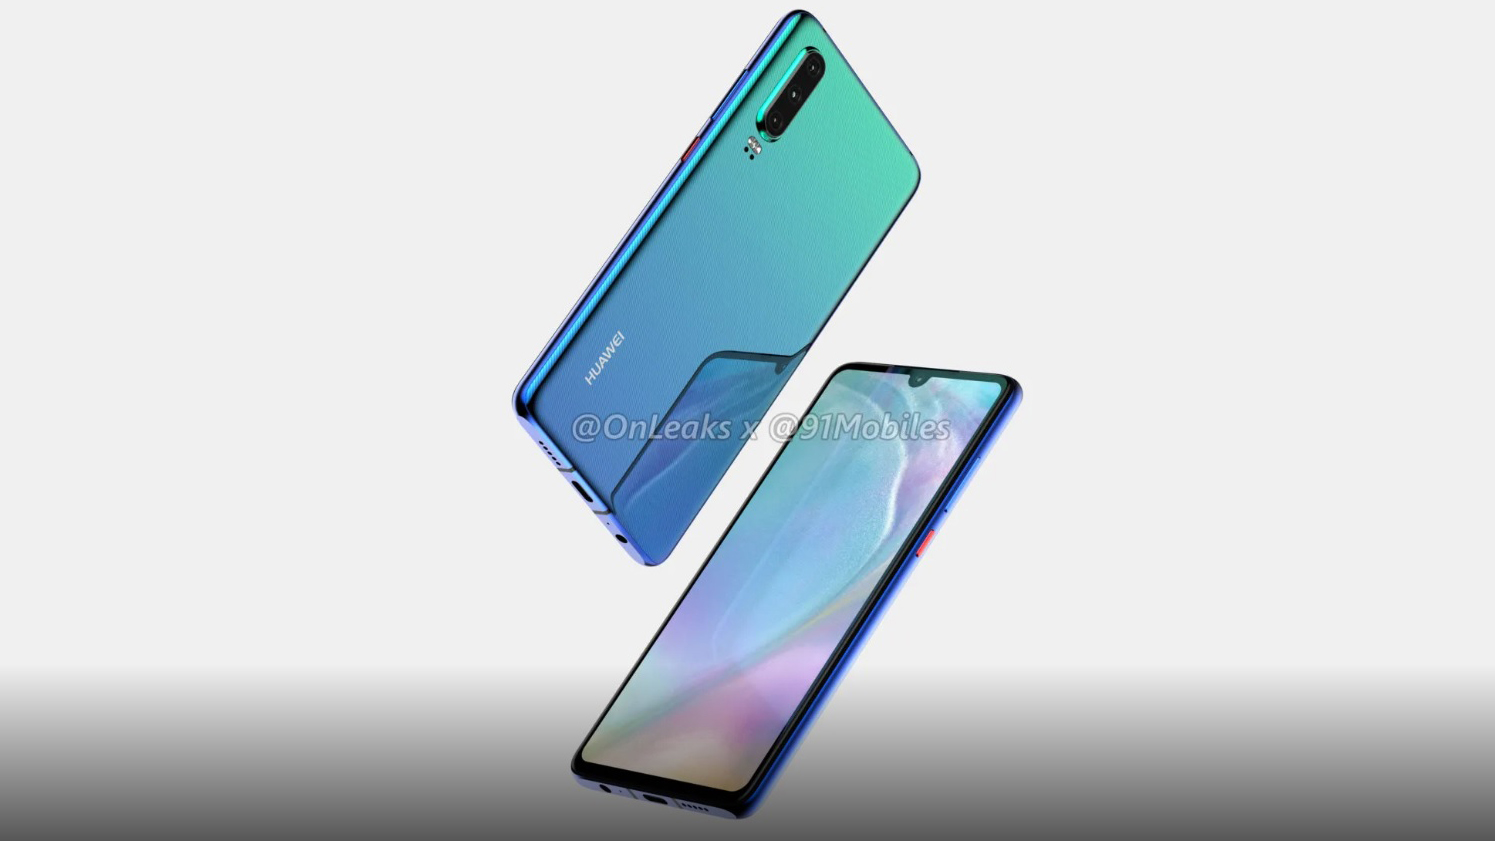 A rendered image of the Huawei P30.